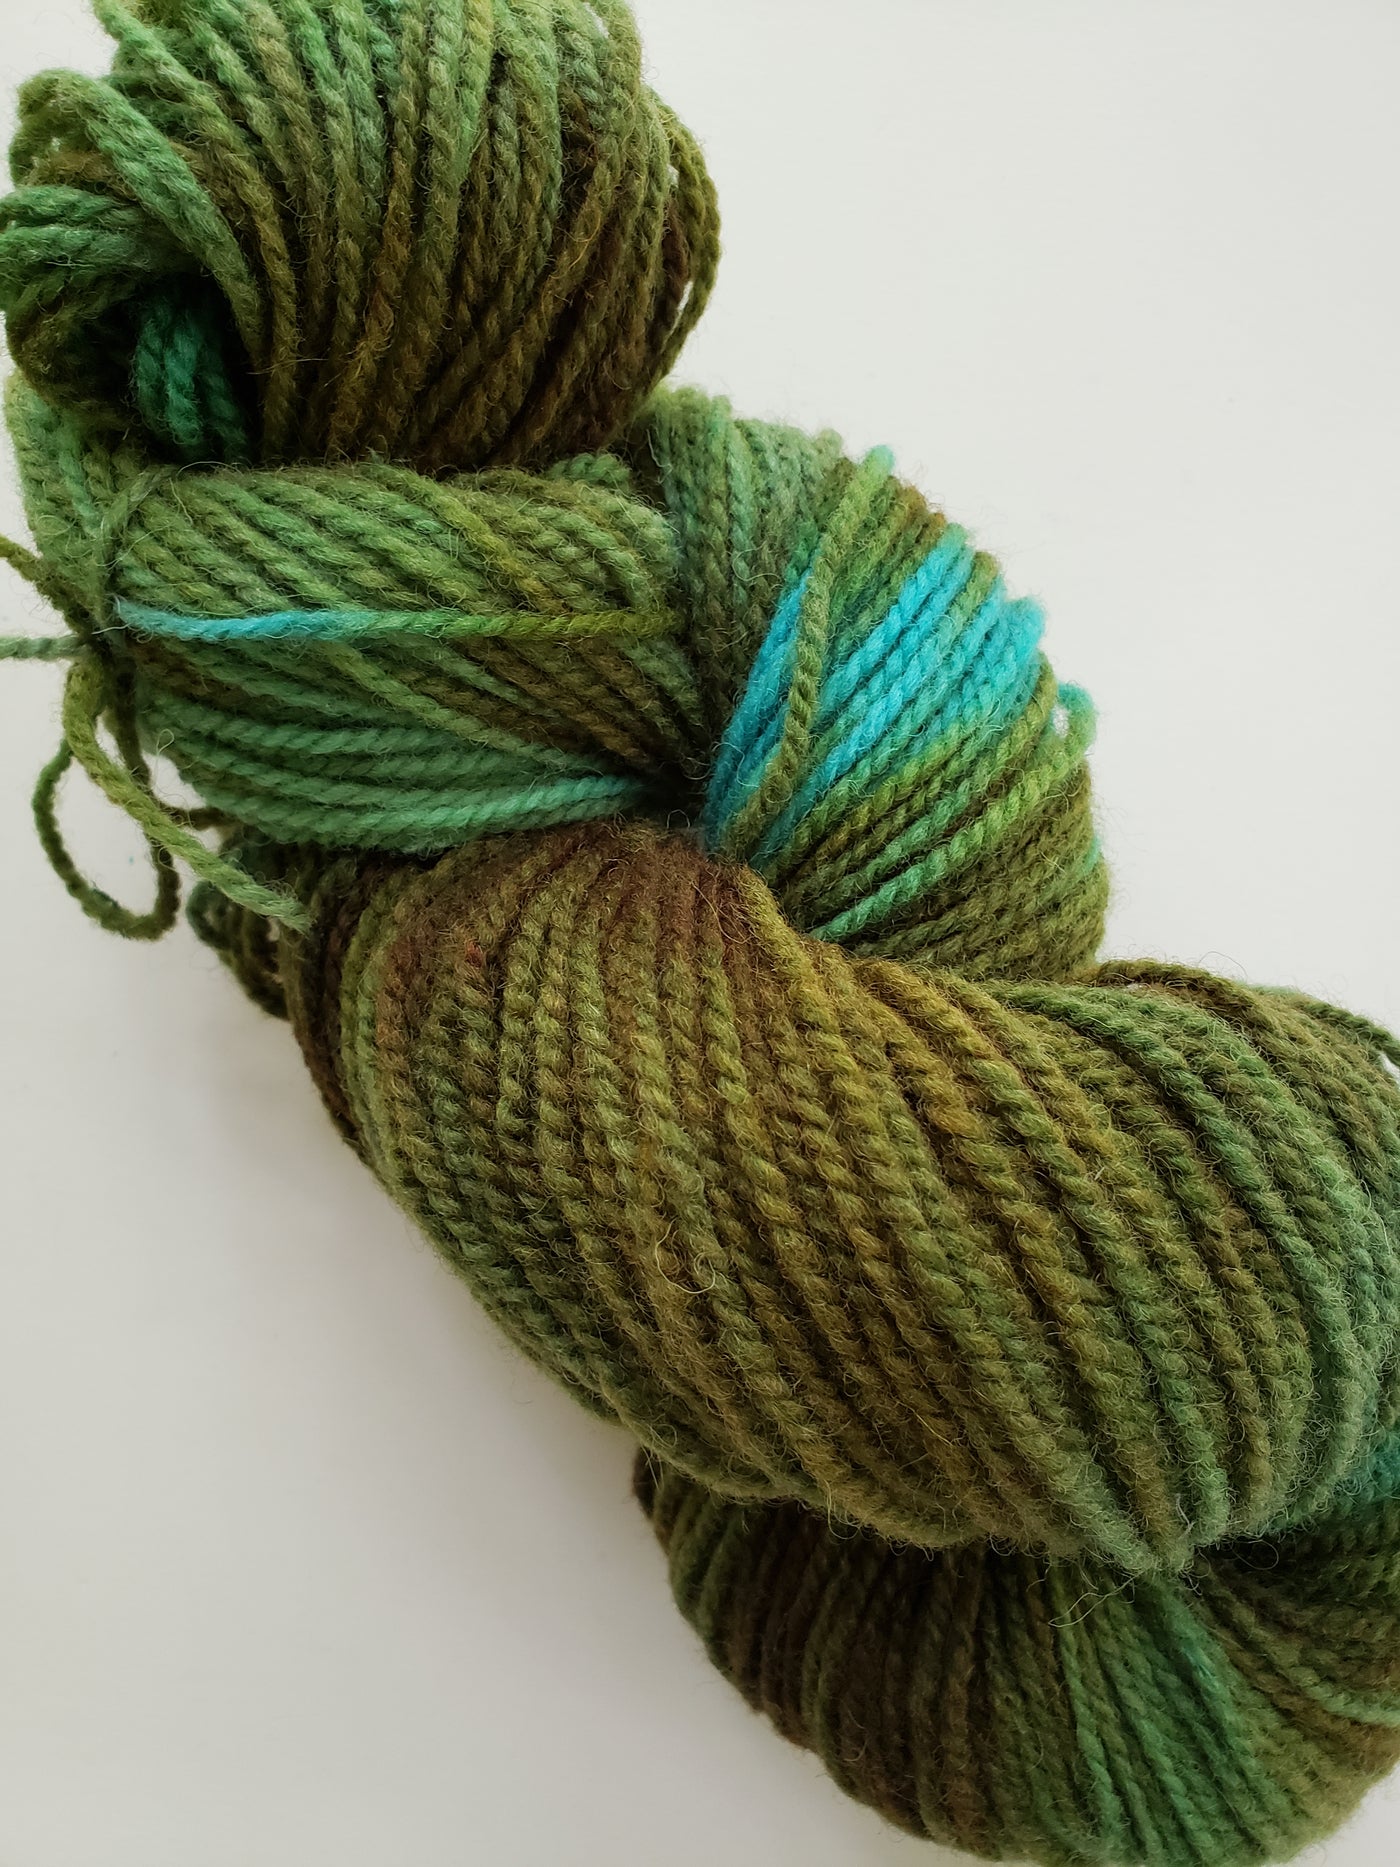 TEA LEAVES - Hand Dyed Shades of Blue-Green Worsted Yarn for Rug